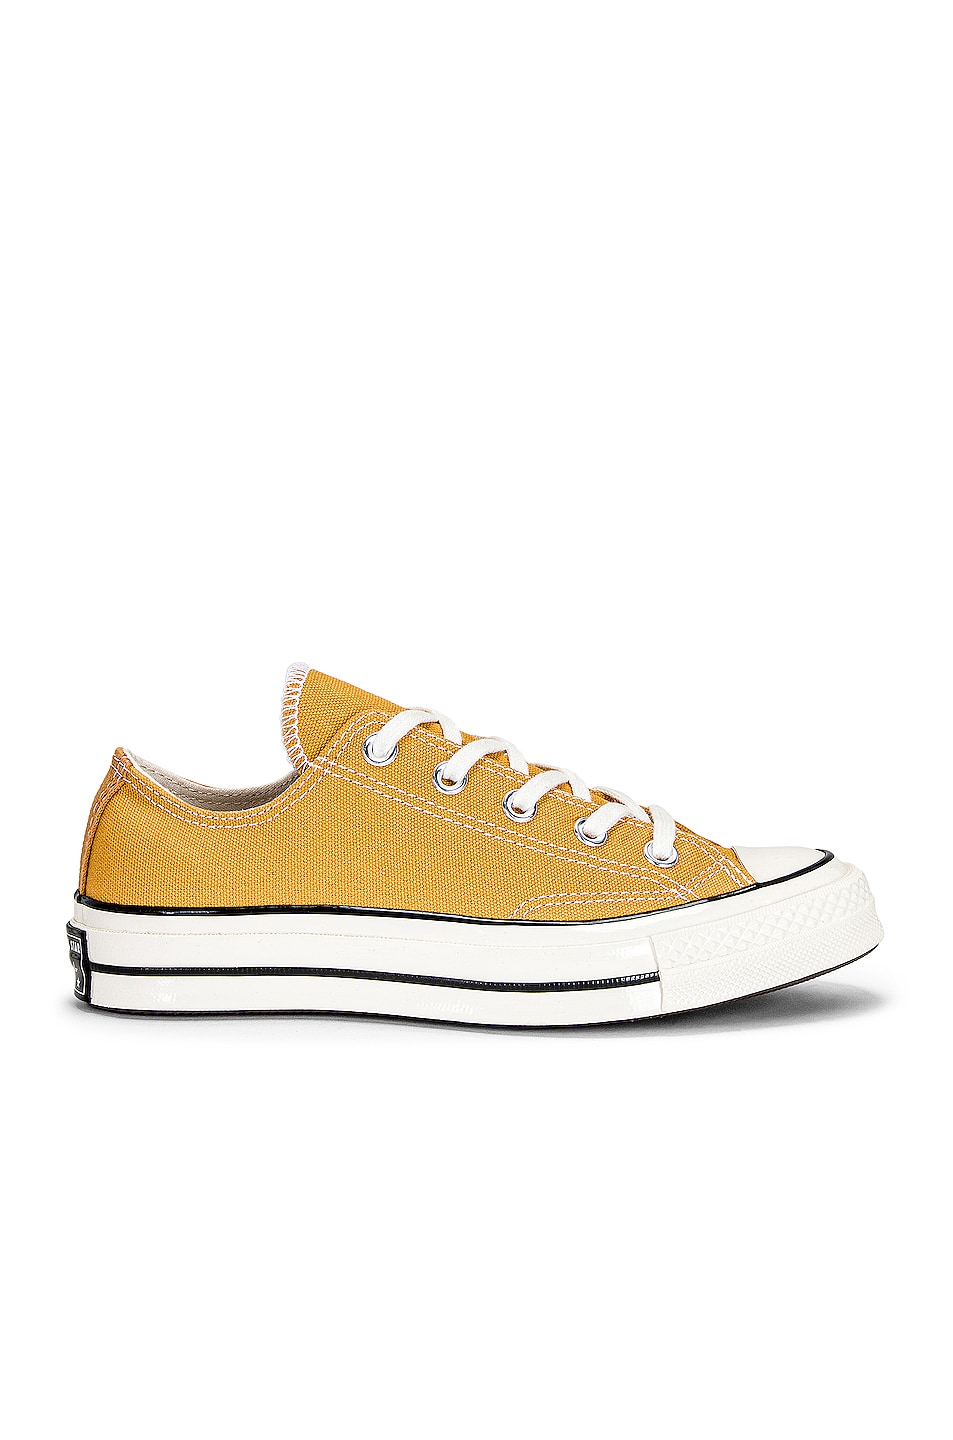 Image 1 of Converse Chuck 70 Canvas Low Tops in Sunflower, Black, & Egret